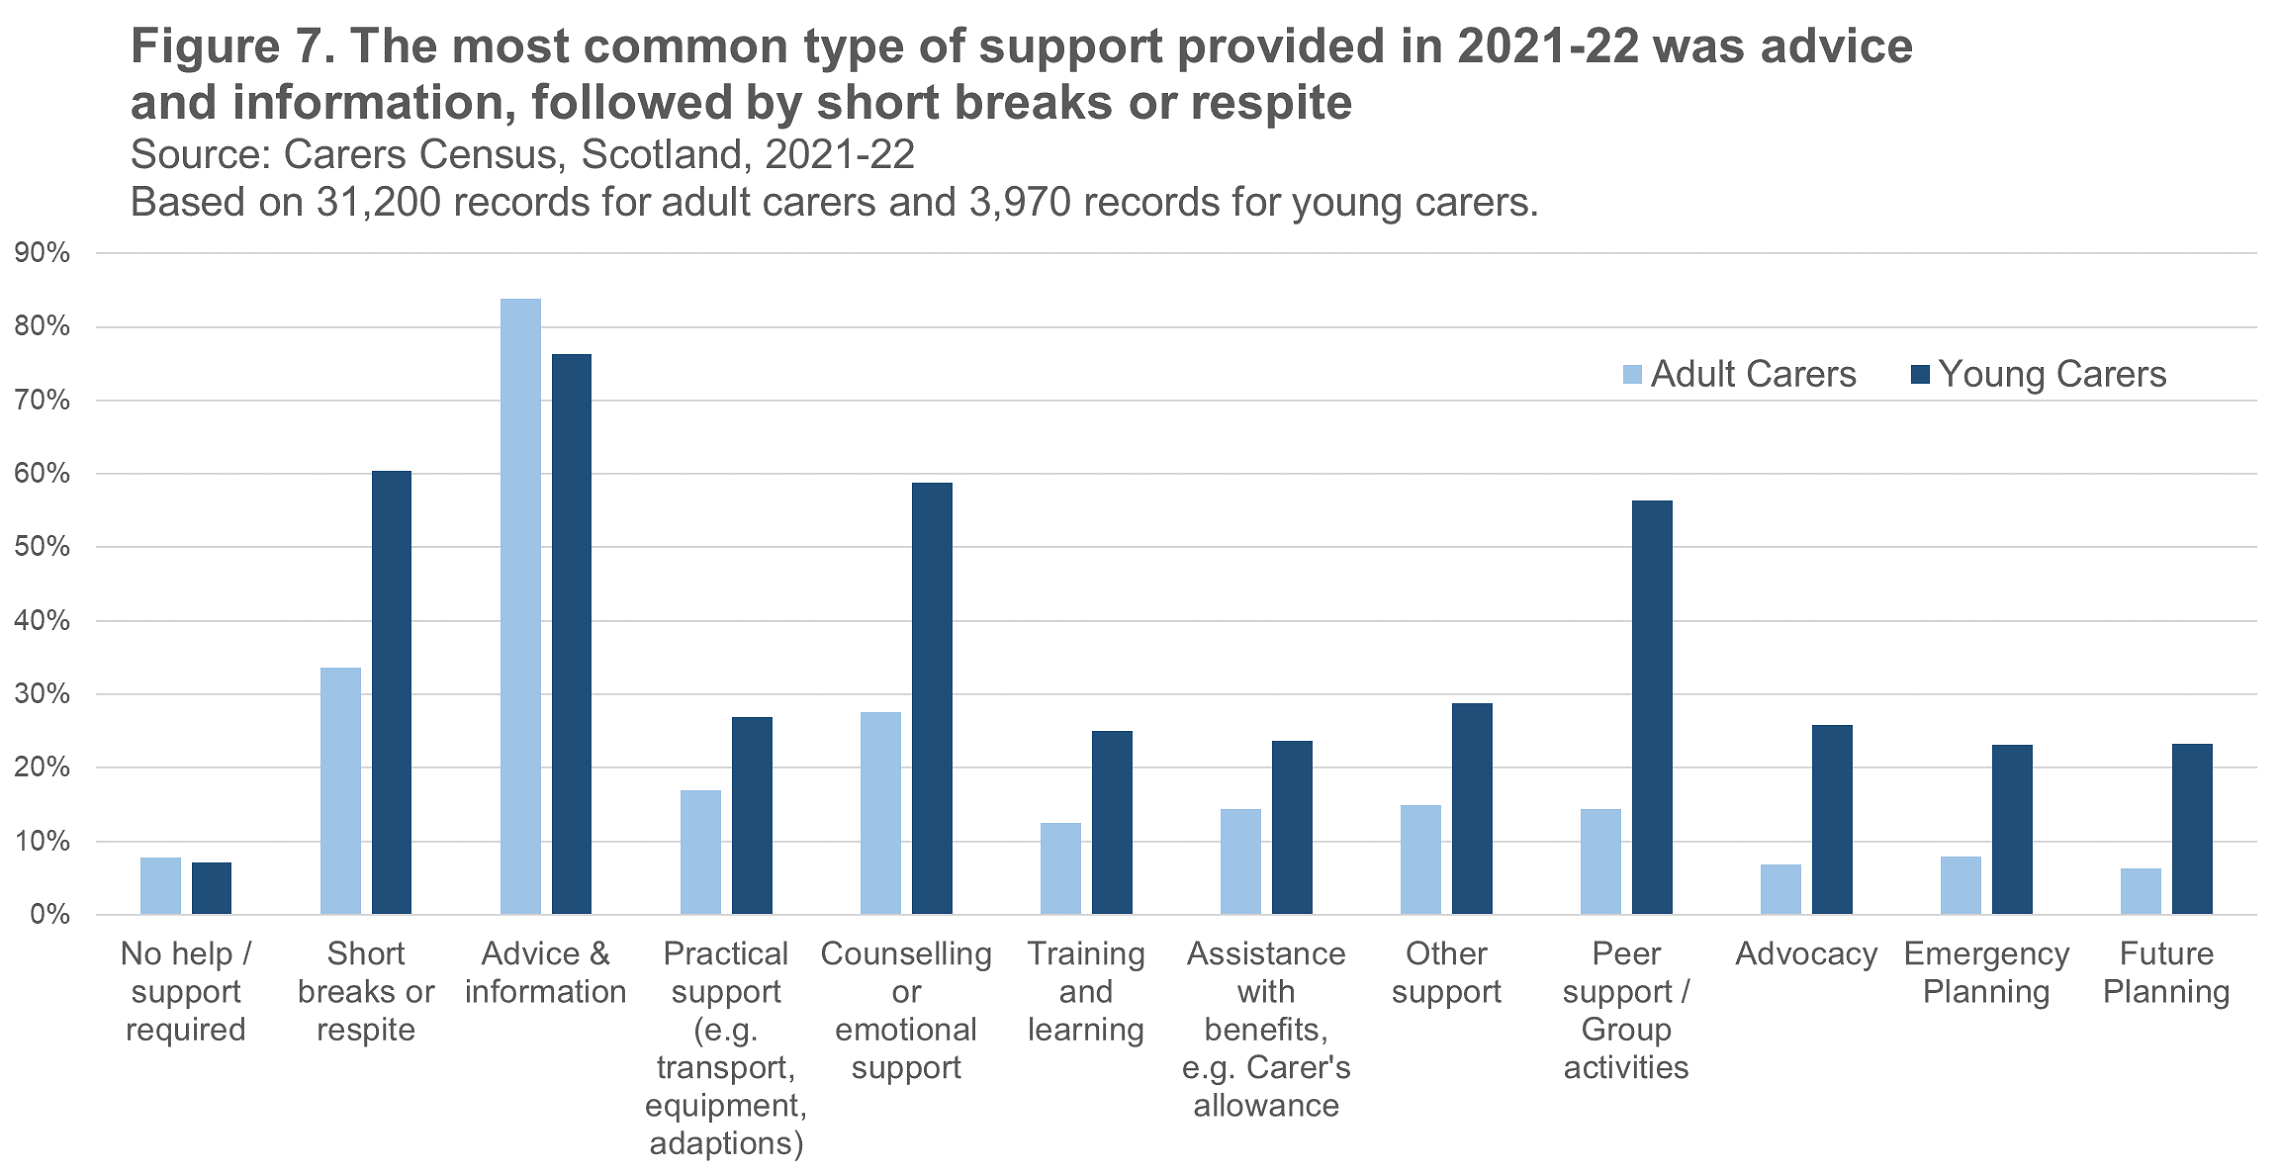 Bar chart showing that the most common types of support provided were advice and information, and short breaks and respite.